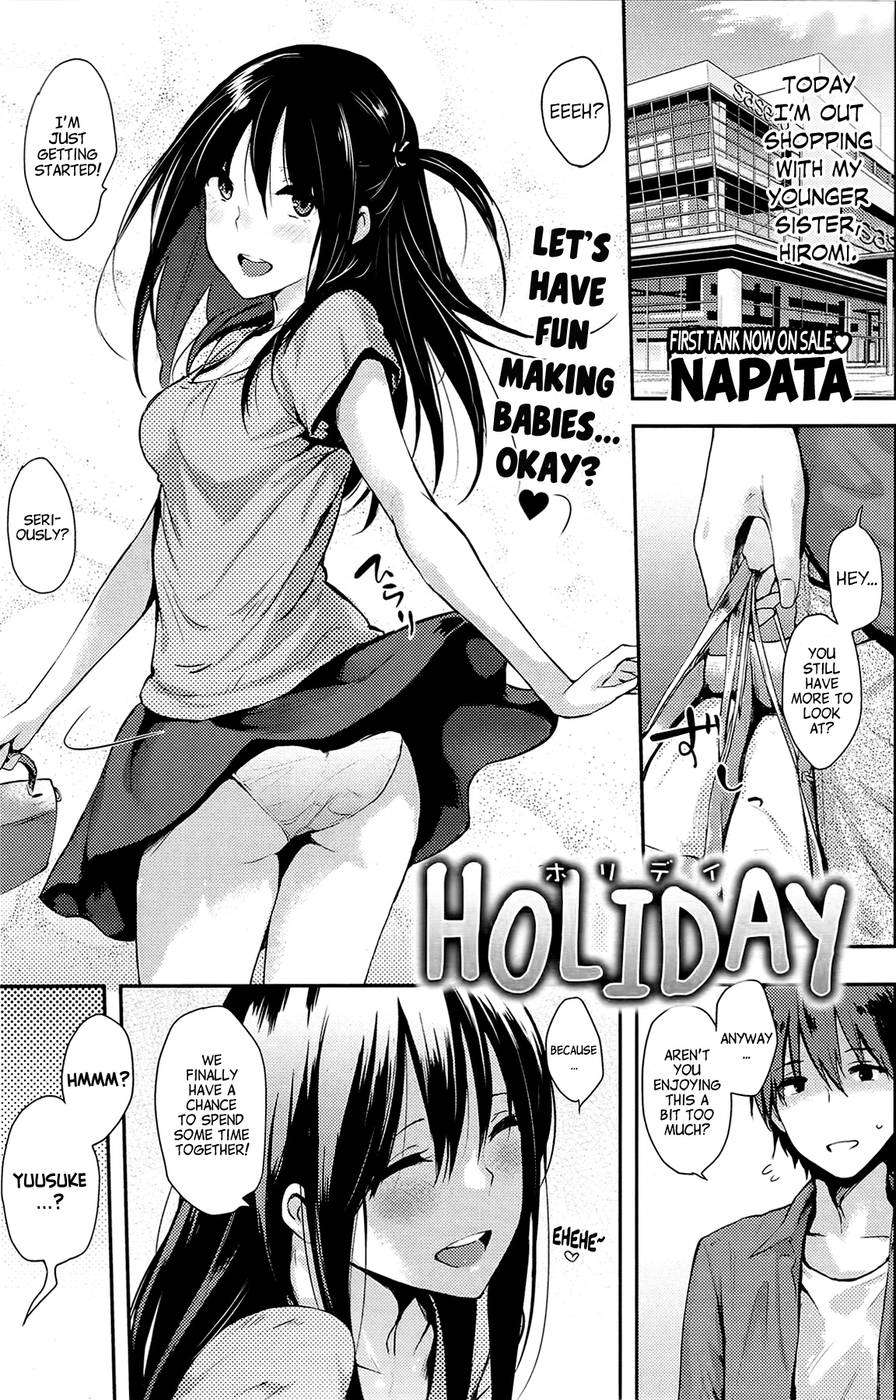 housewives at play hentai animephile Porn Photos